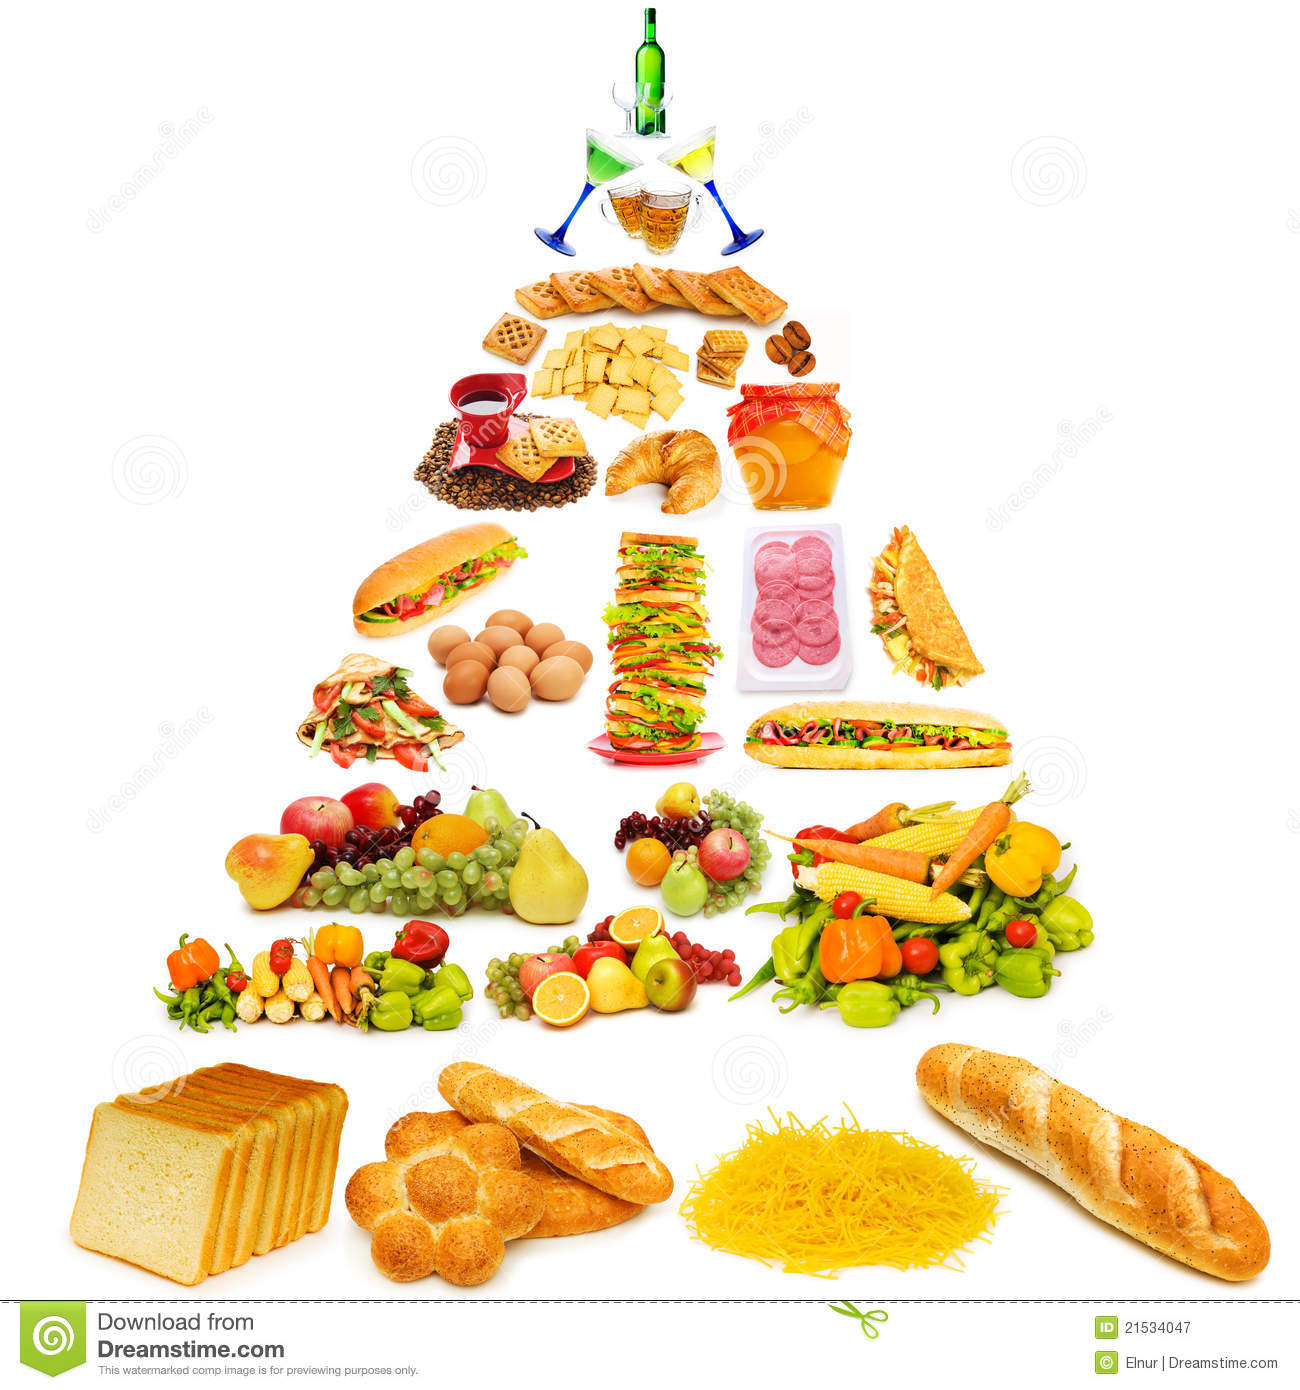 Food Pyramid   Lots Of Items Royalty Free Stock Photography   Image